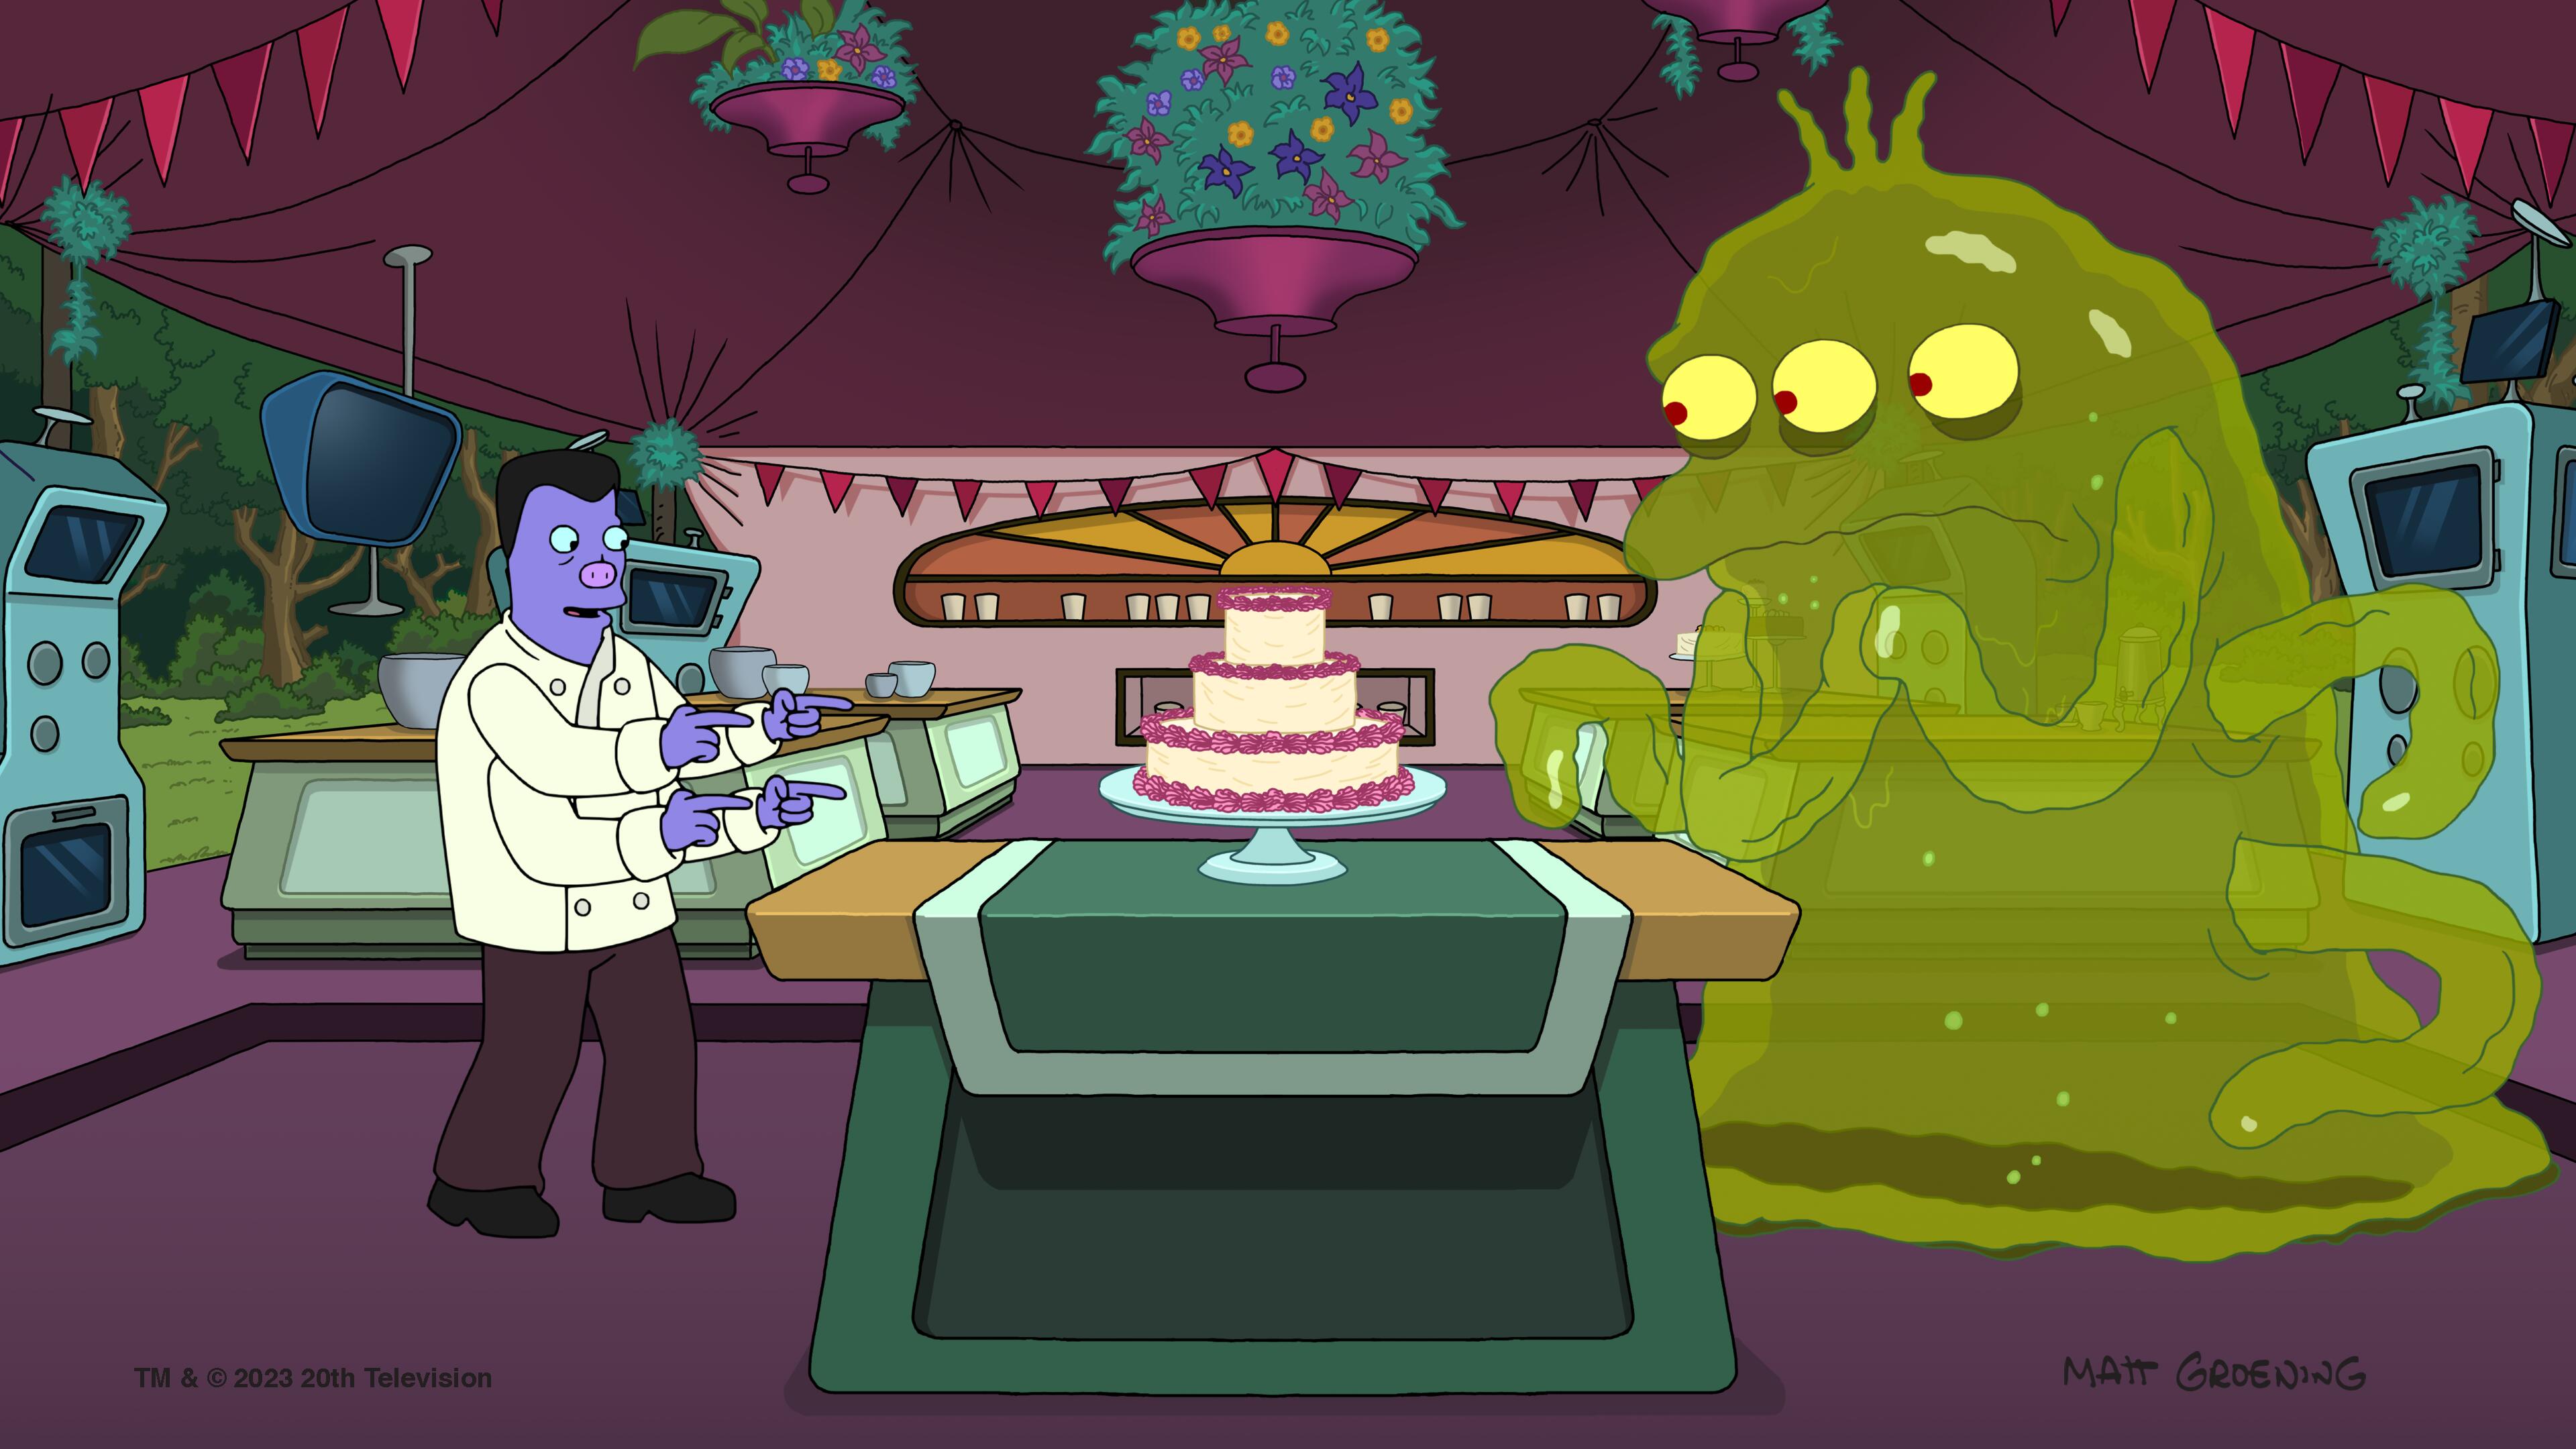 Two aliens on a cooking show look at a cake on a table in “Futurama.”